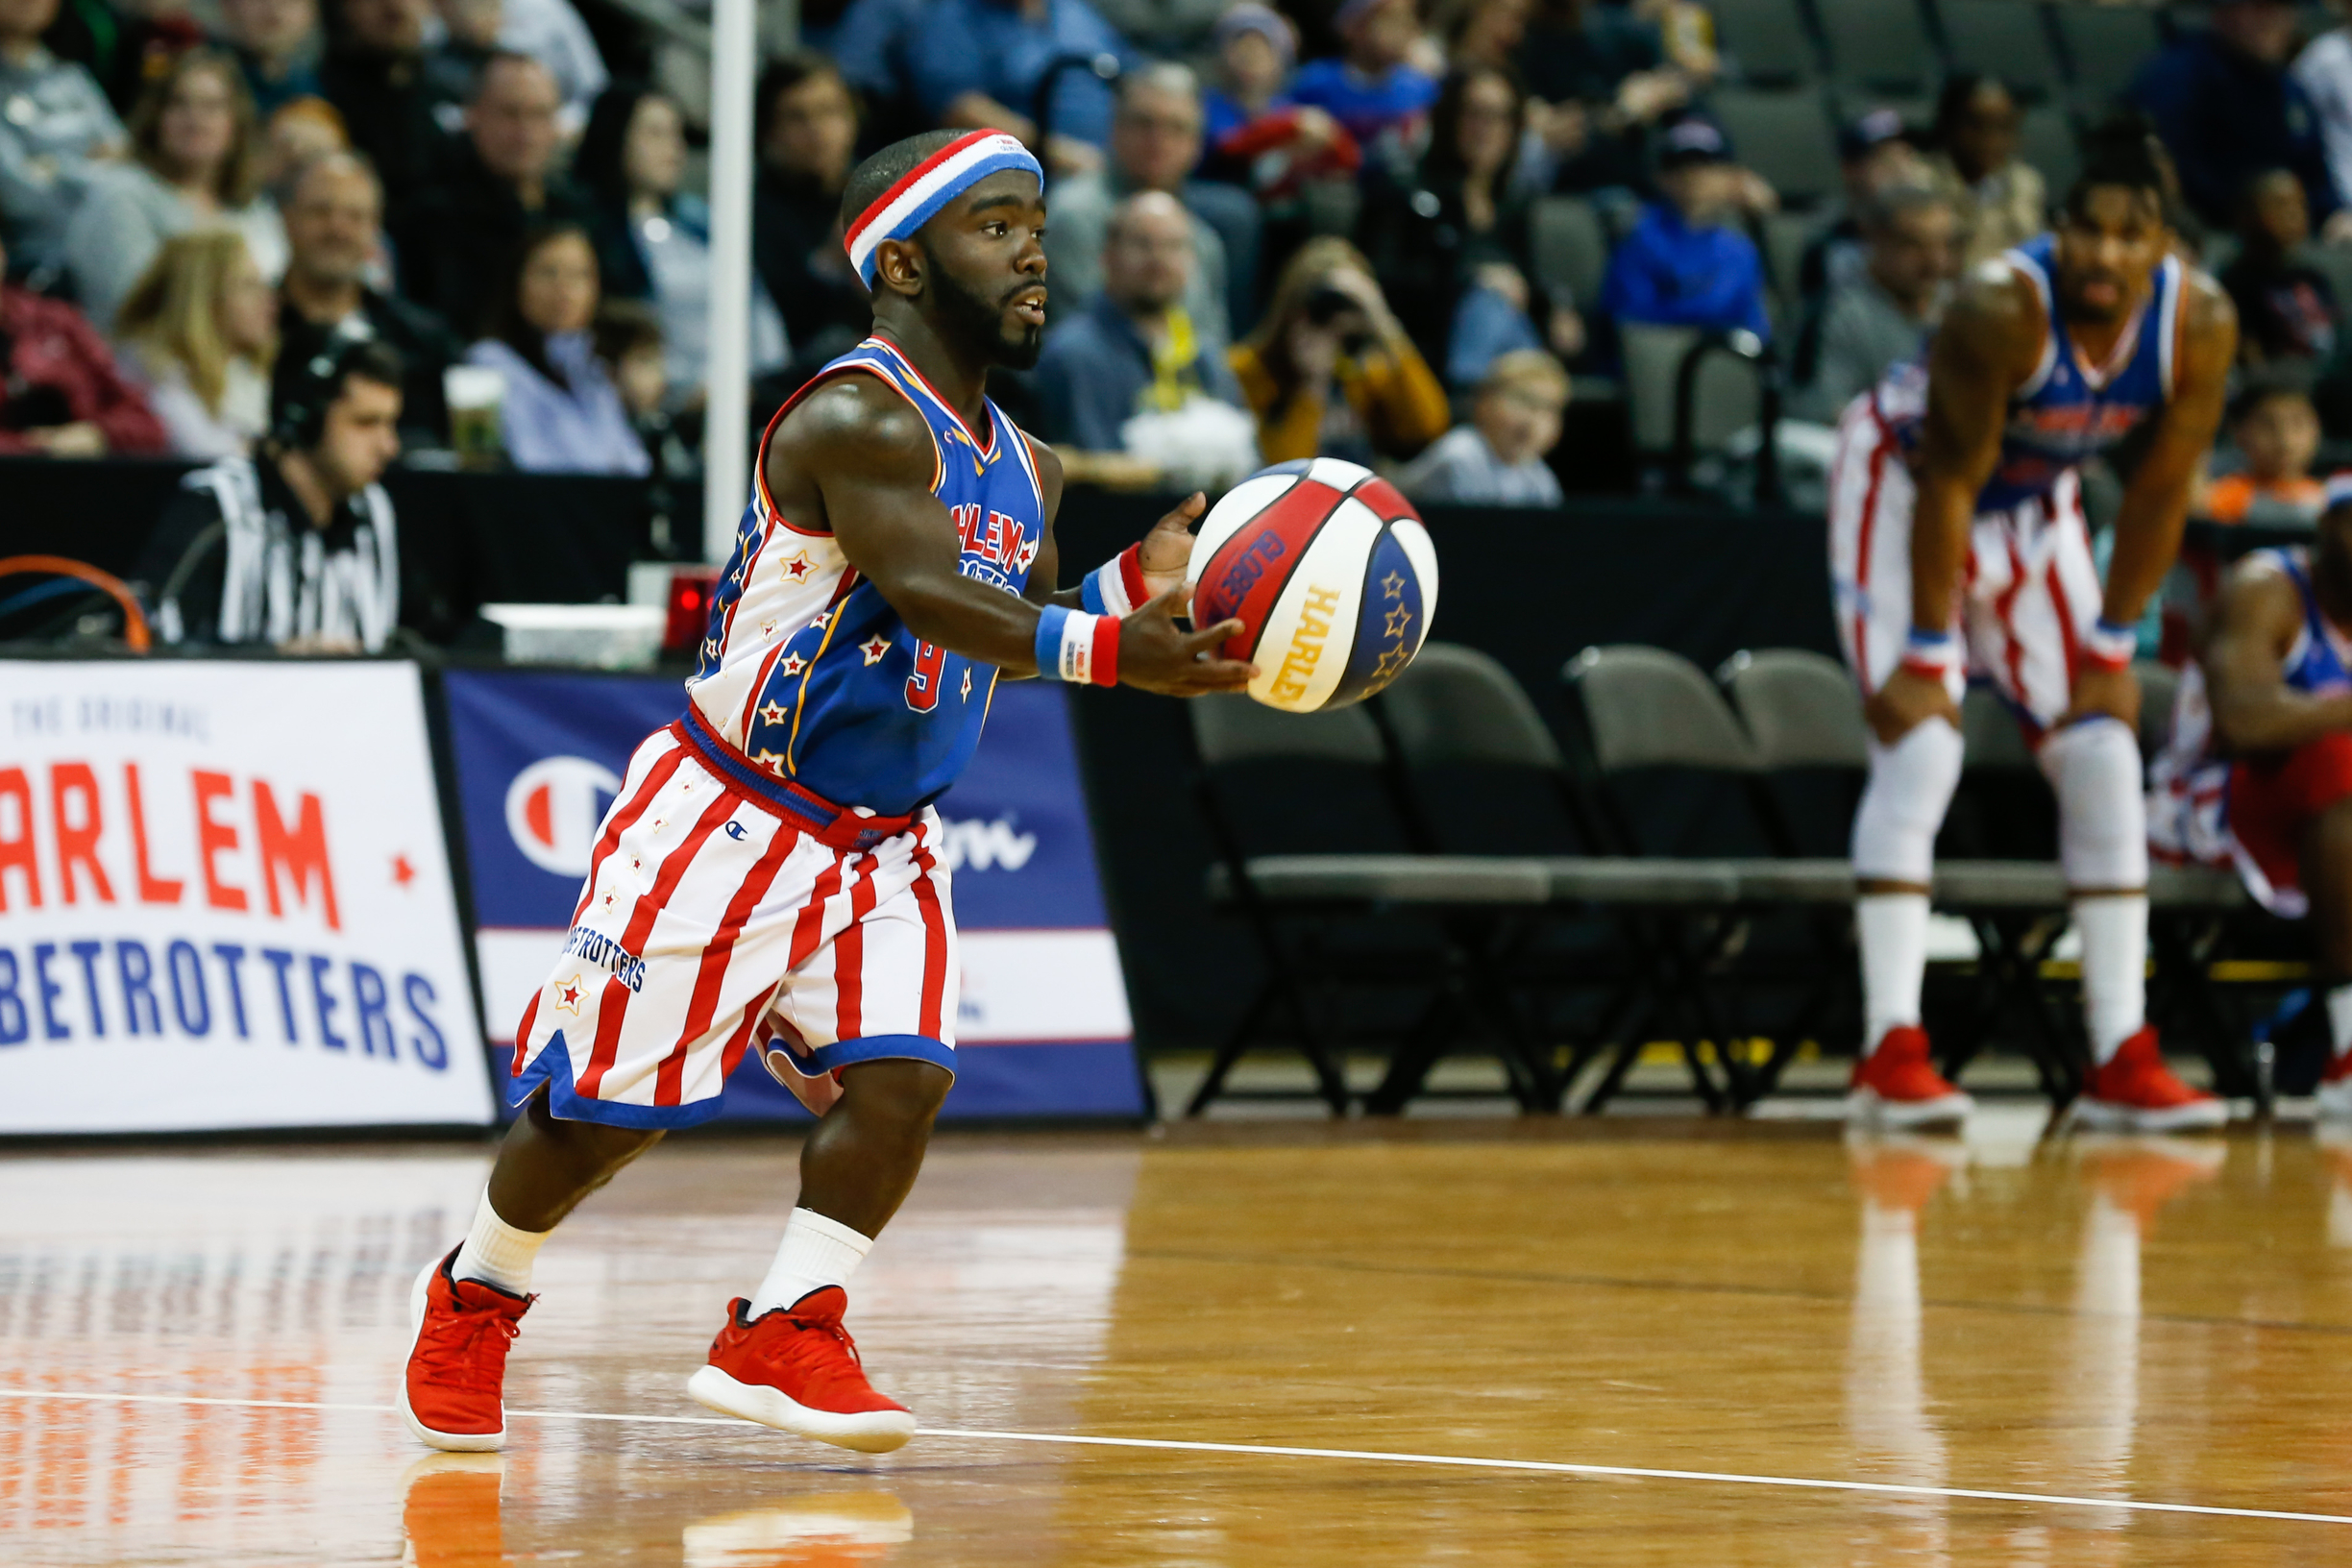 Hot Shot (@manilove102) with the backflip & 4-pointer 🏀🔥 # HarlemGlobetrotters #TrickShotTuesday 🎶: @andymineo